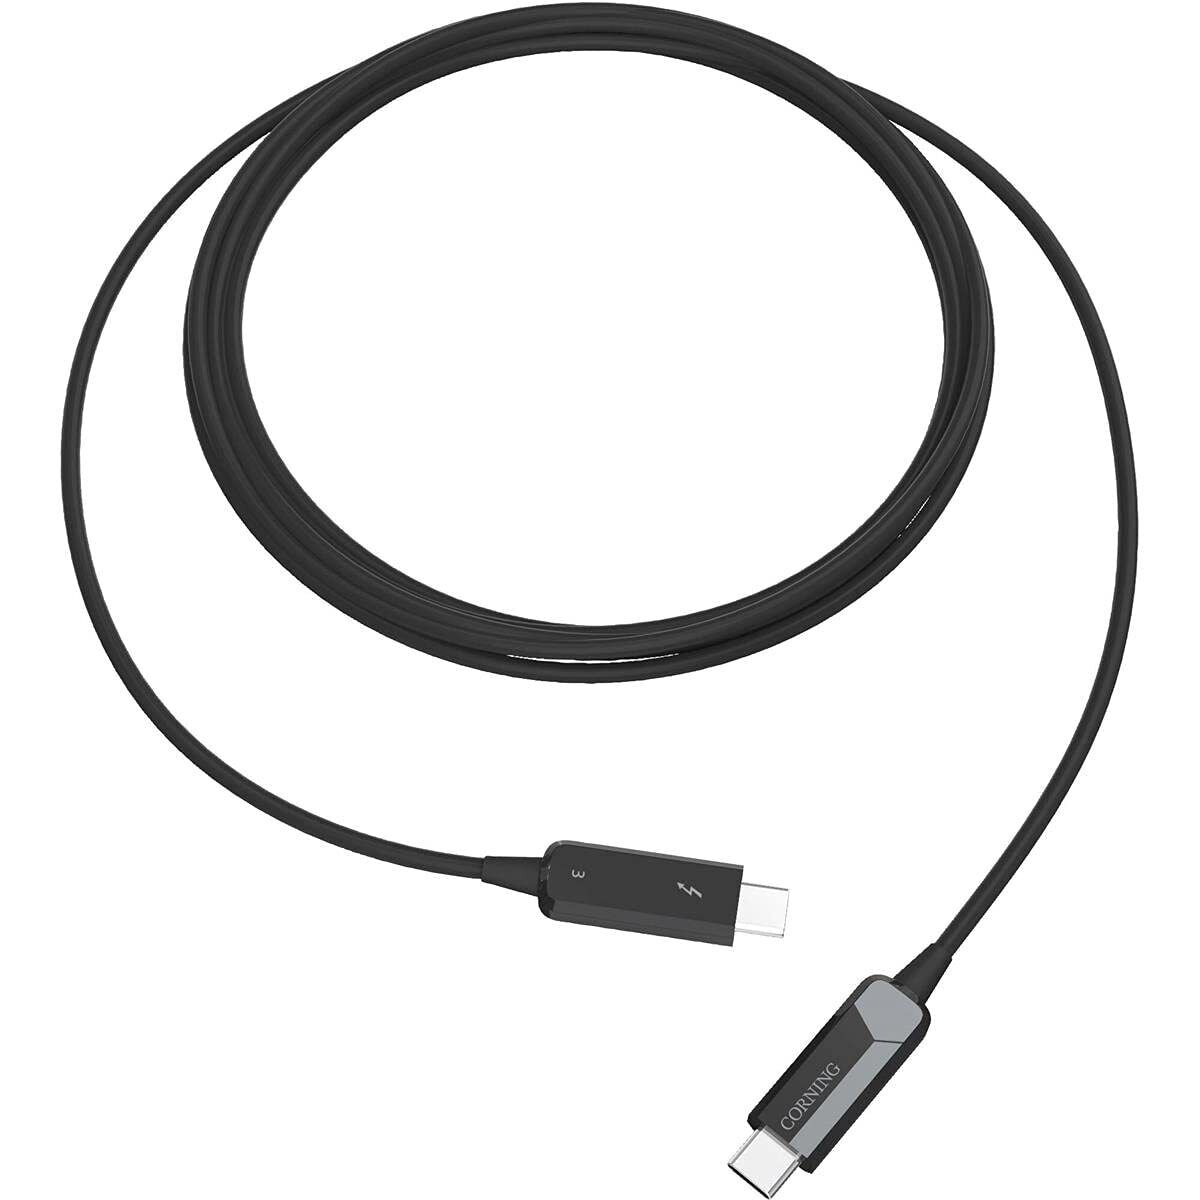 Optical Cables by Corning Thunderbolt 3 USB Type-C Male Optical Cable, 5m